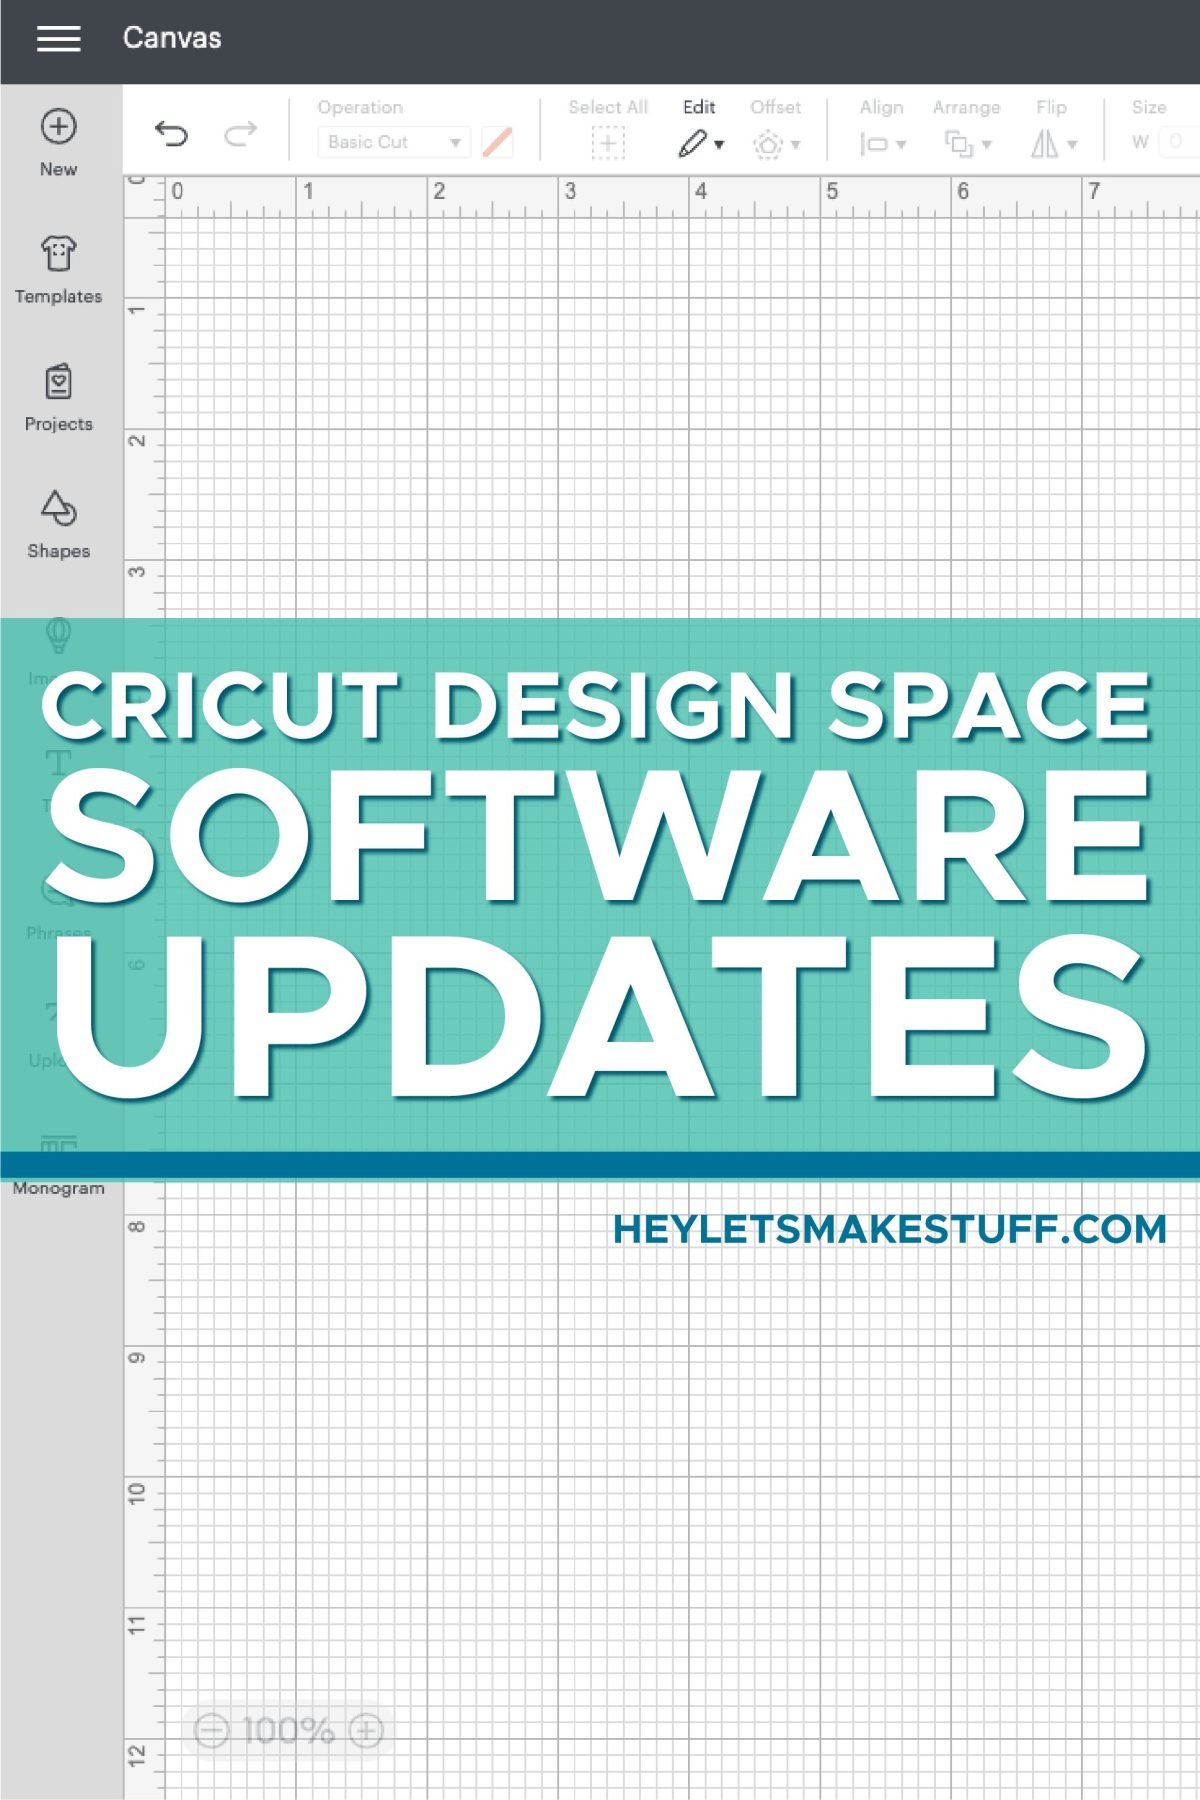 DS Canvas with "Cricut Design Space Software Updates" in white text on teal box.